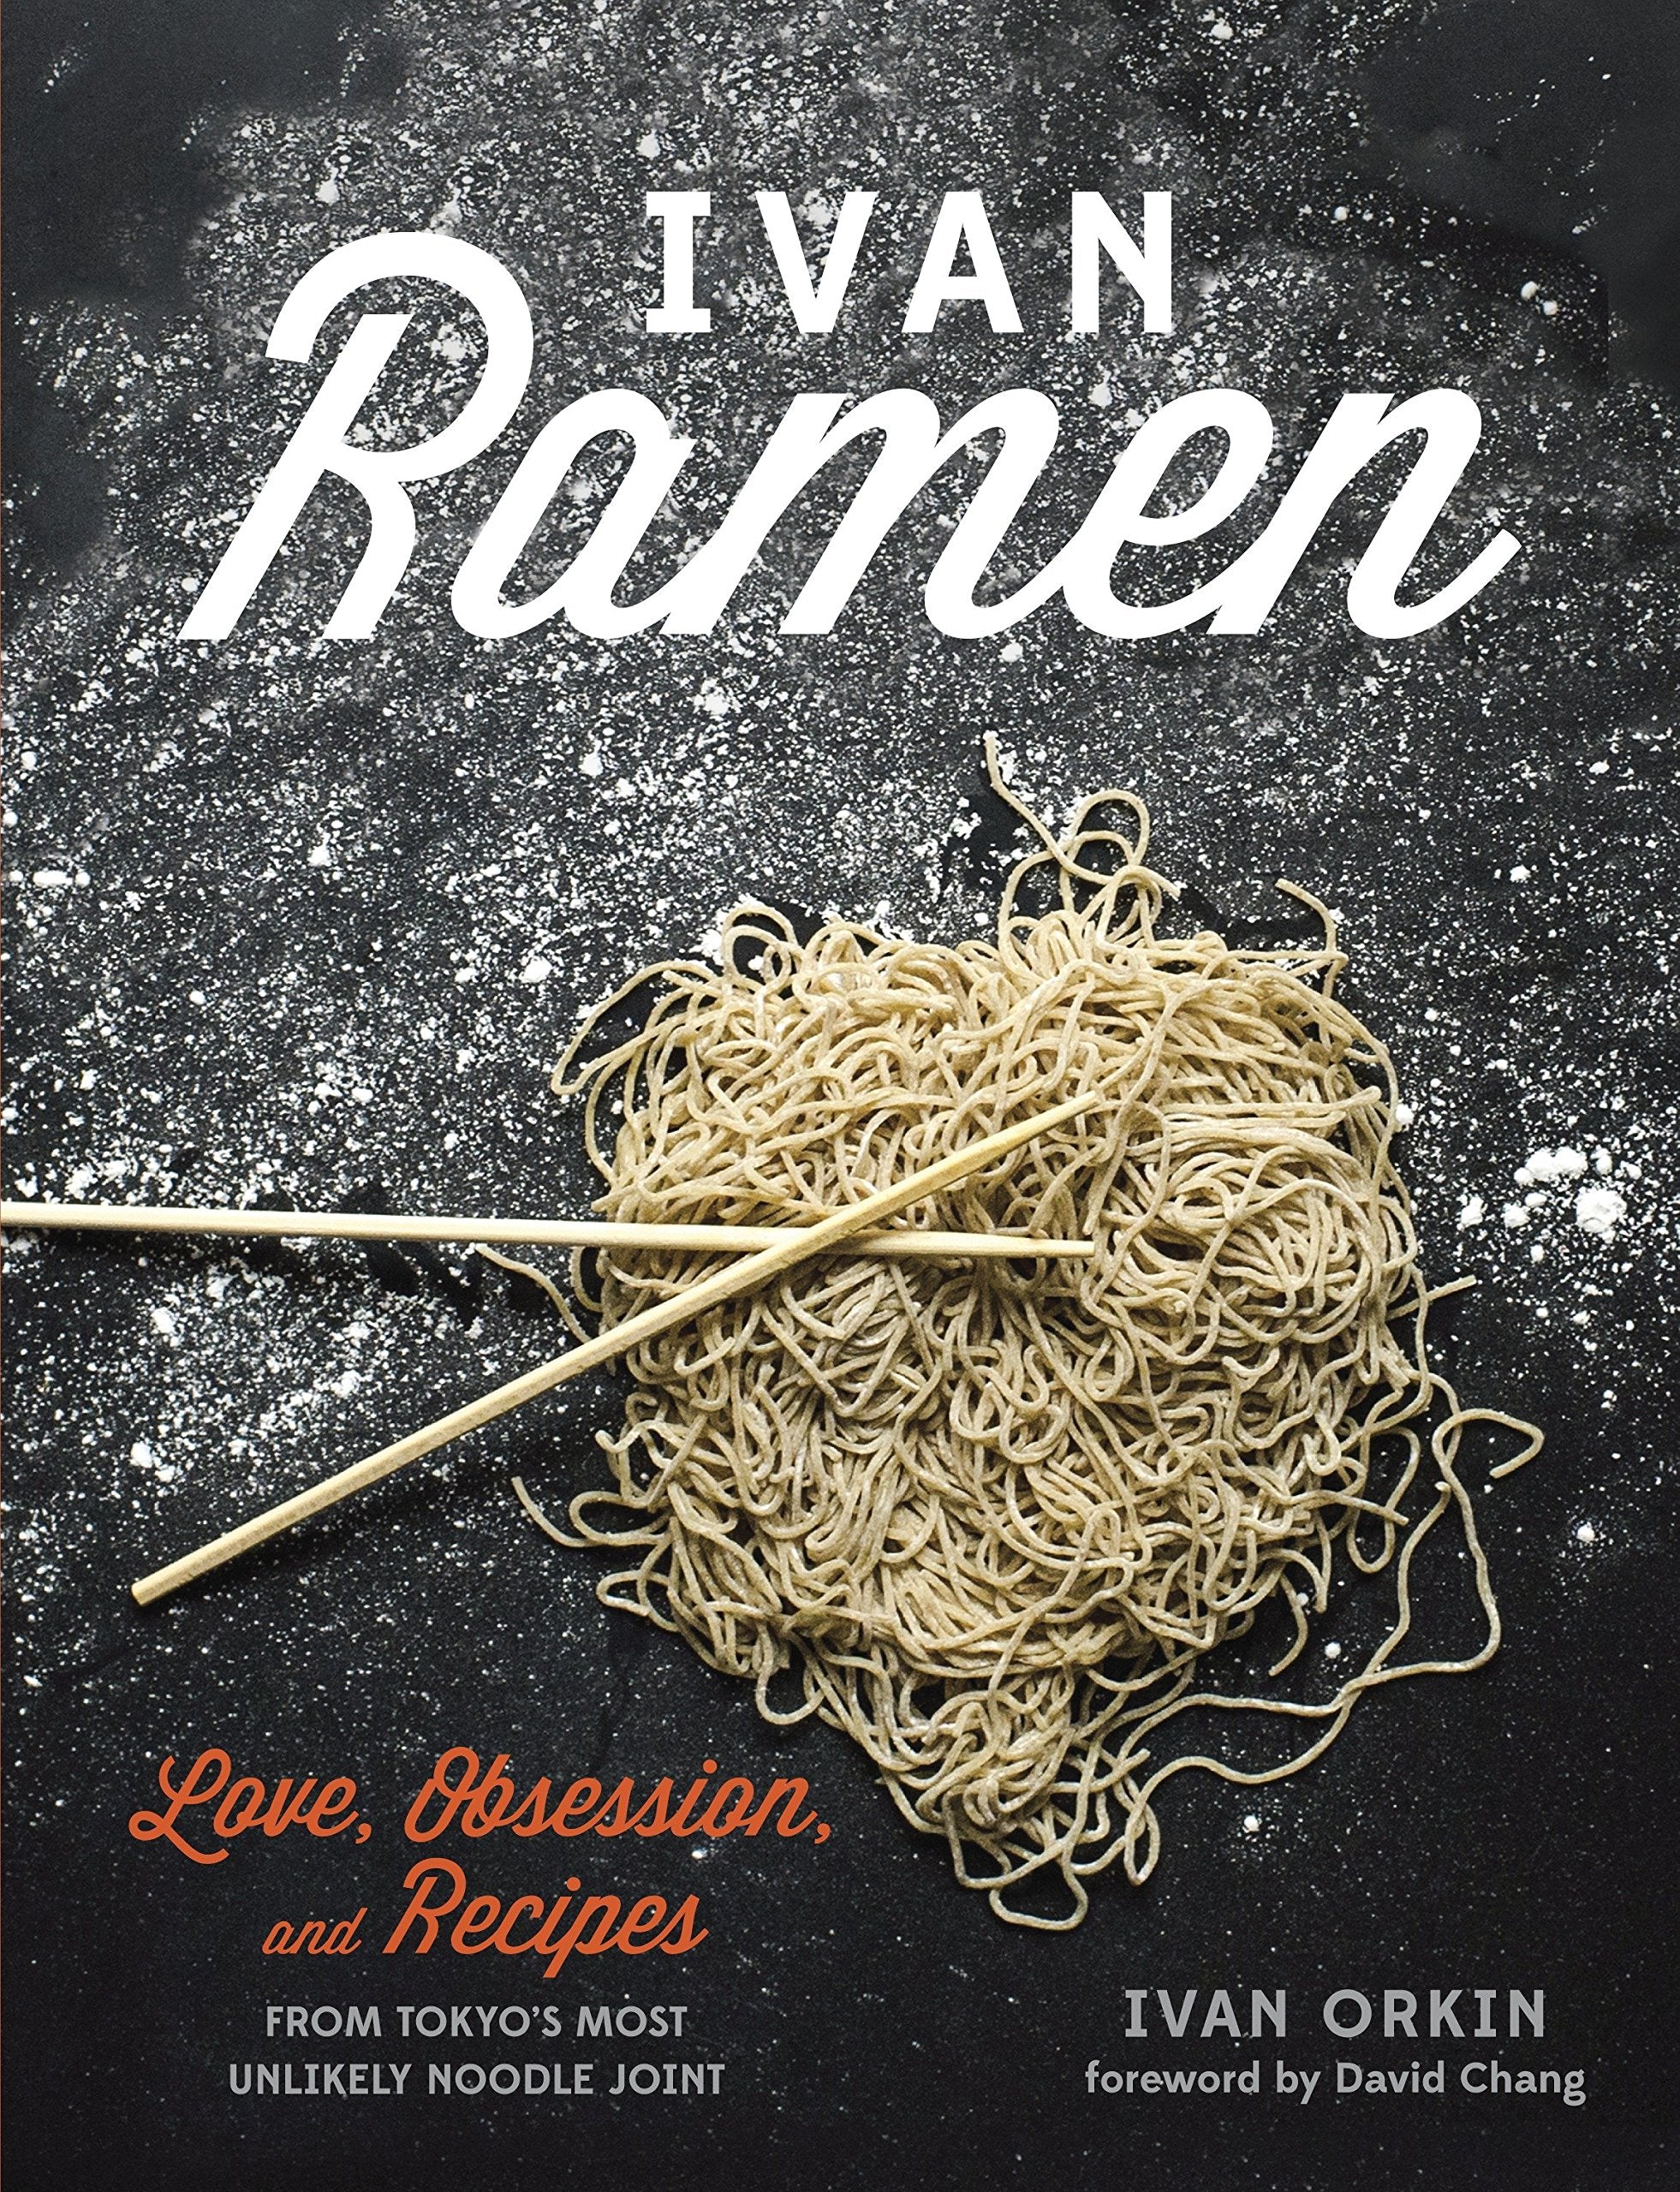 Ivan Ramen: Love, Obsession, and Recipes from Tokyo's Most Unlikely Noodle Joint (Ivan Orkin)